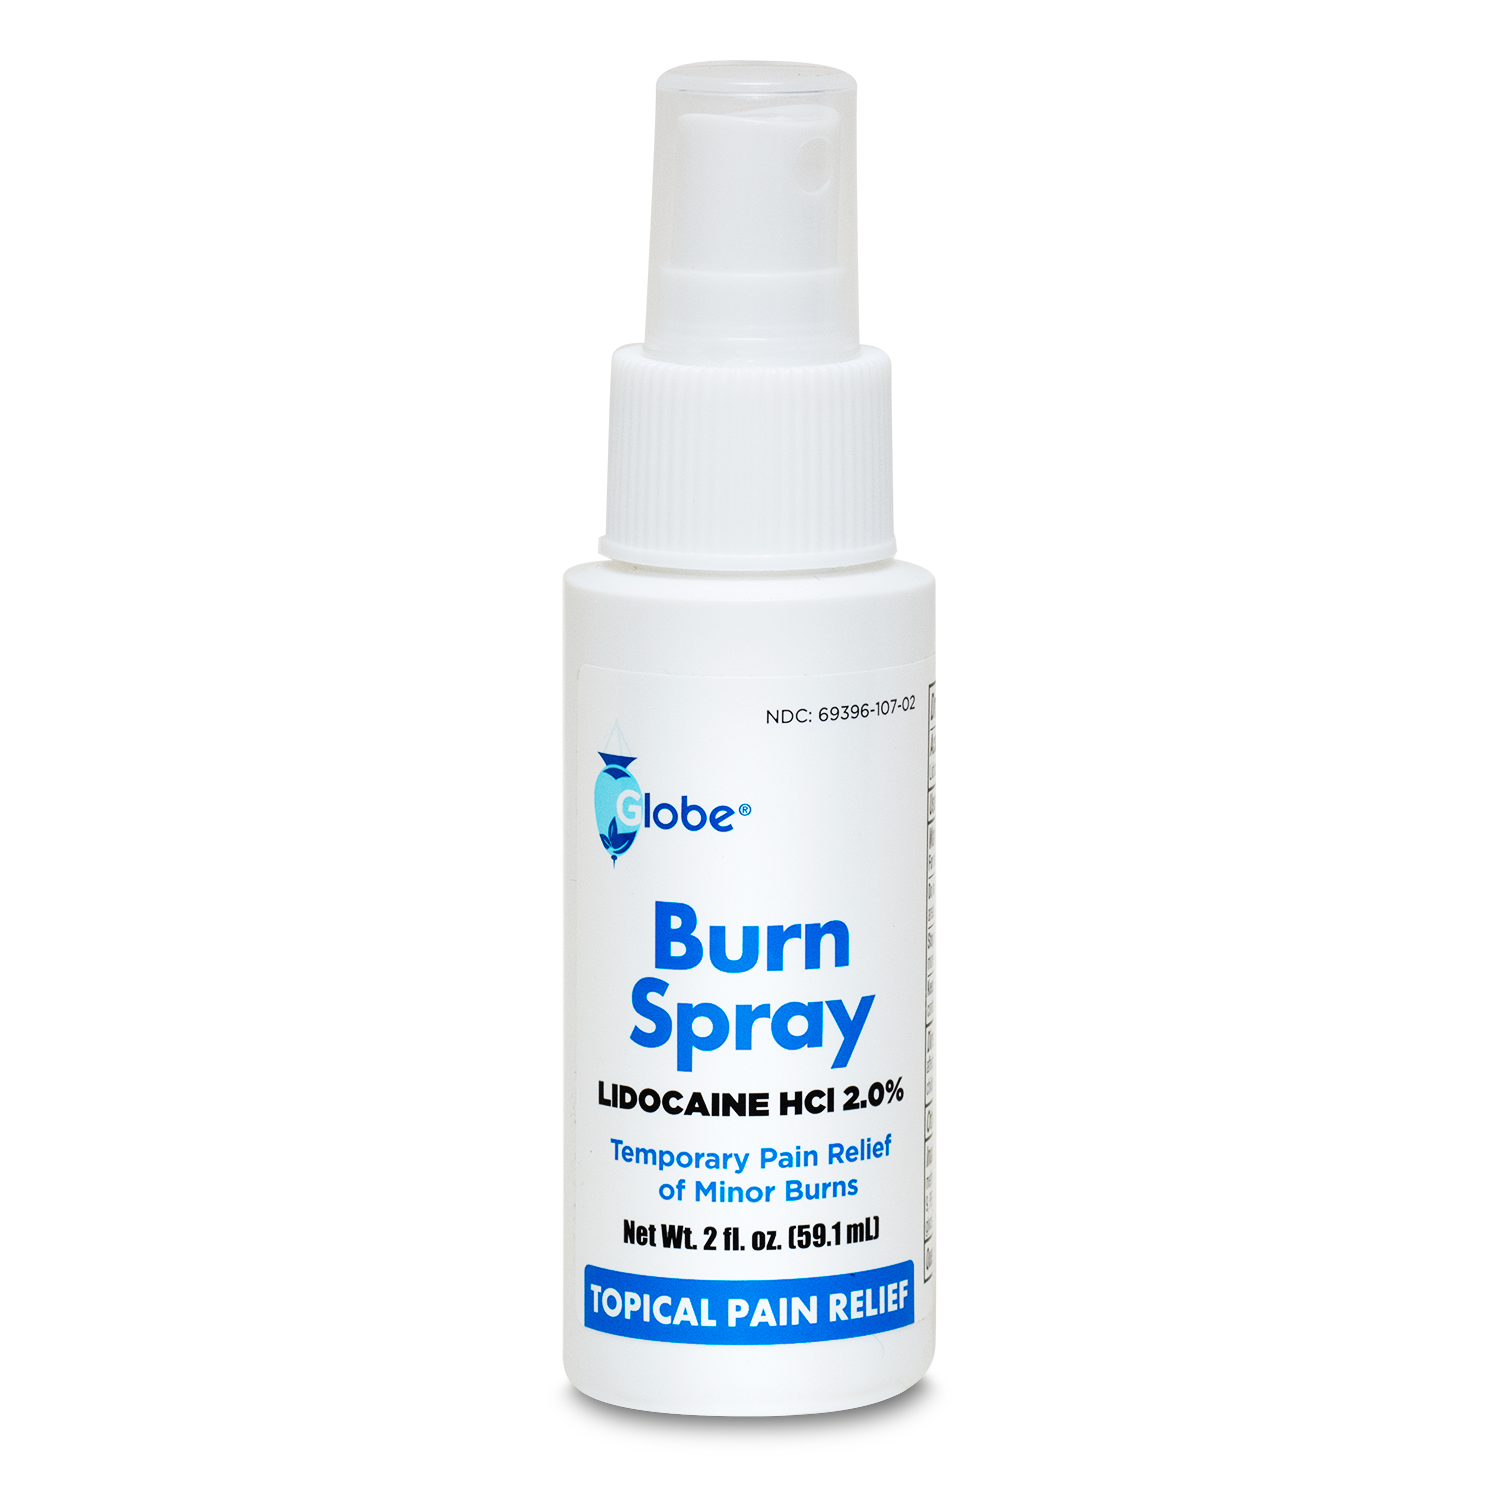 Globe Burn Spray, Lidocaine 2%. Topical Anesthetic Pain Relief and Numbing 2 oz Spray Bottle 971